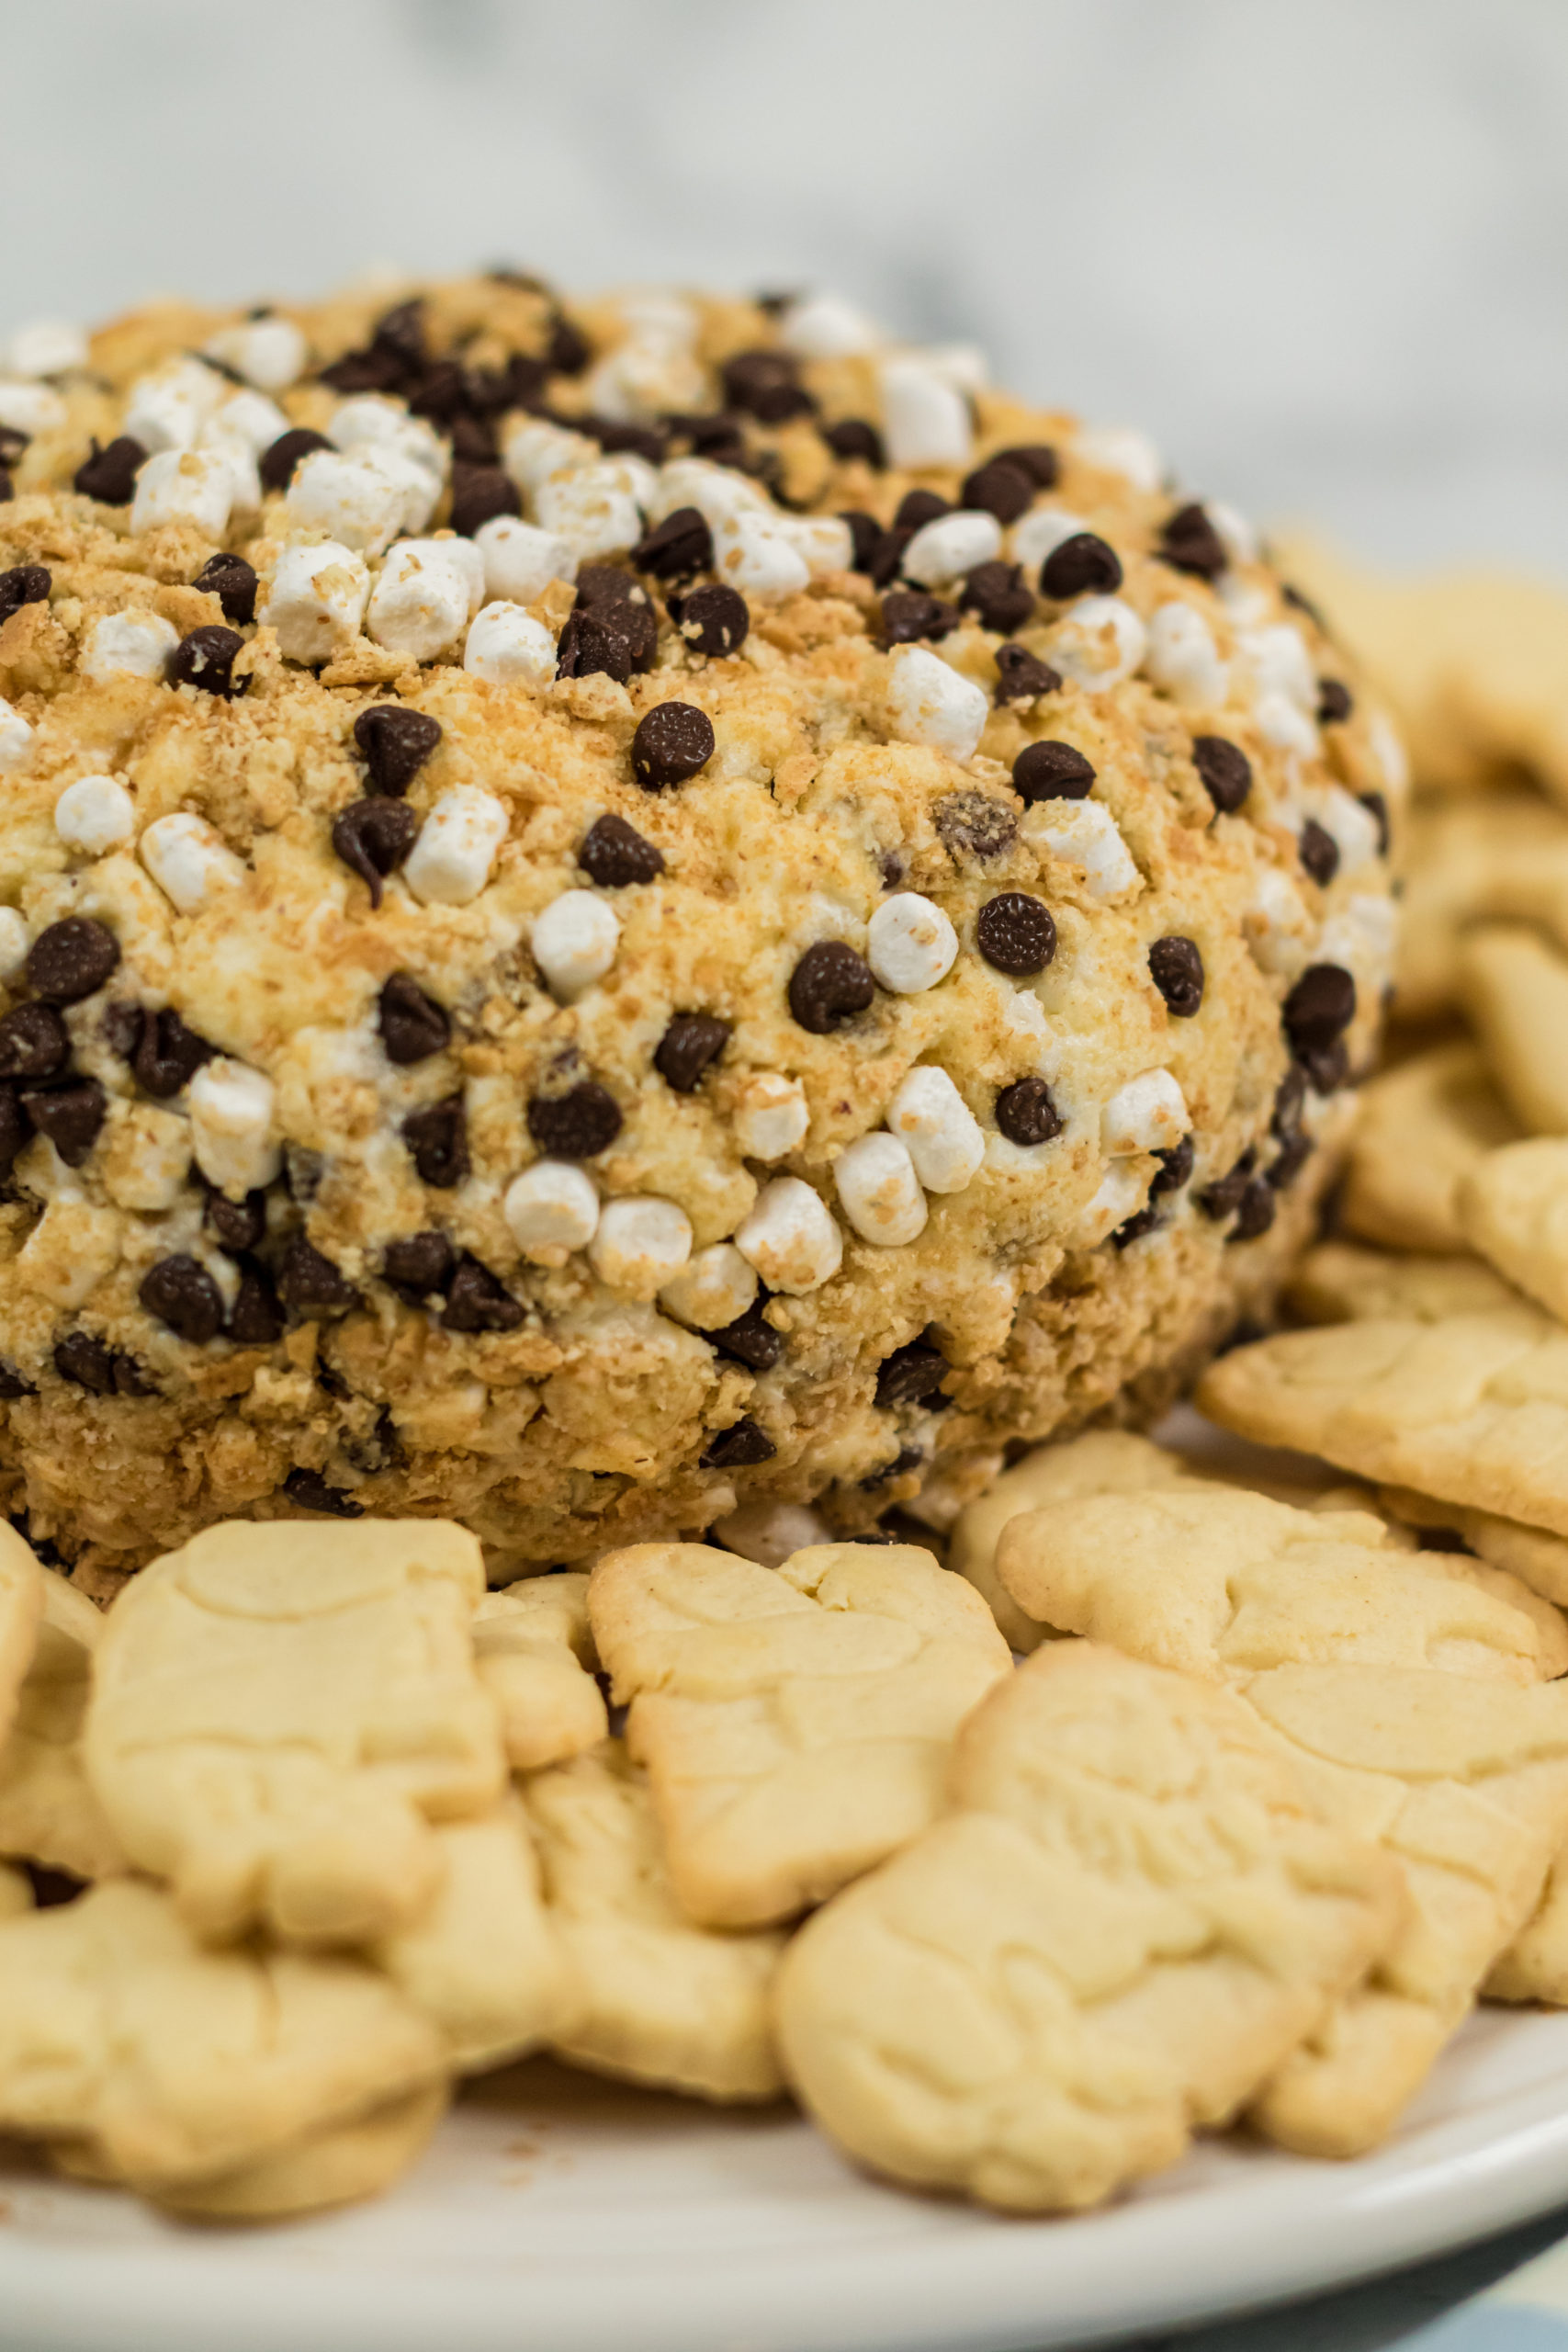 a s'mores cheese ball shown surrounded by animal crackers on a white plate